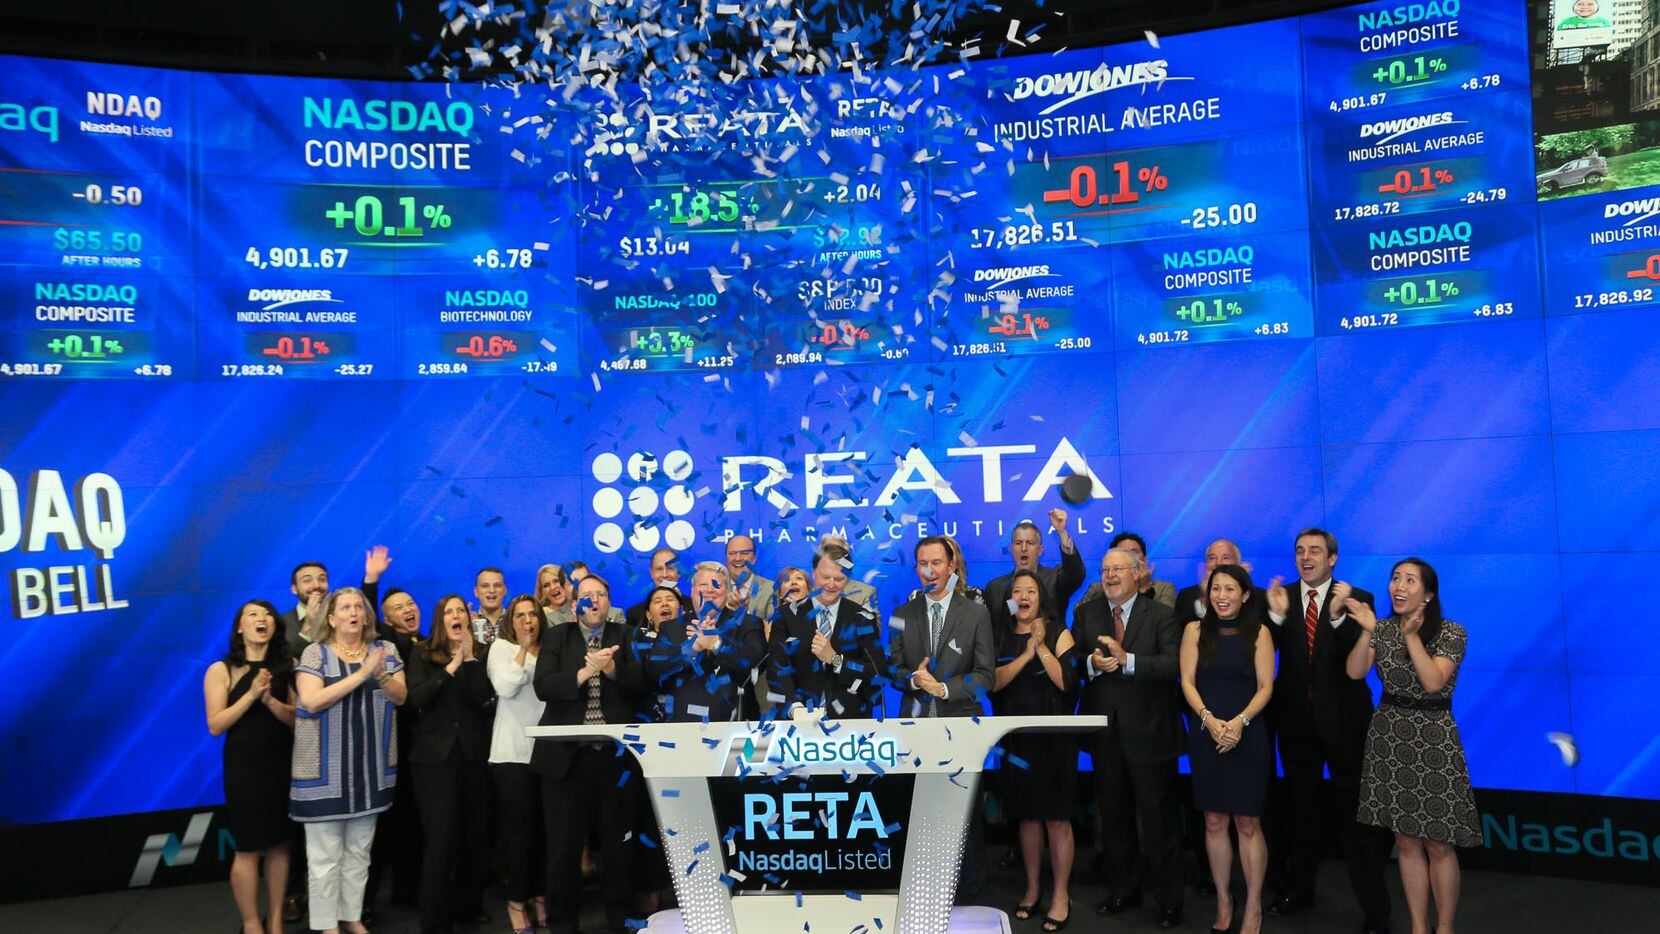 Publicly-traded Reata Pharmaceuticals received a sizable cash injection from the Blackstone Life Sciences investment firm. The clinical stage company expects two of its novel drugs to be approved in 2020.